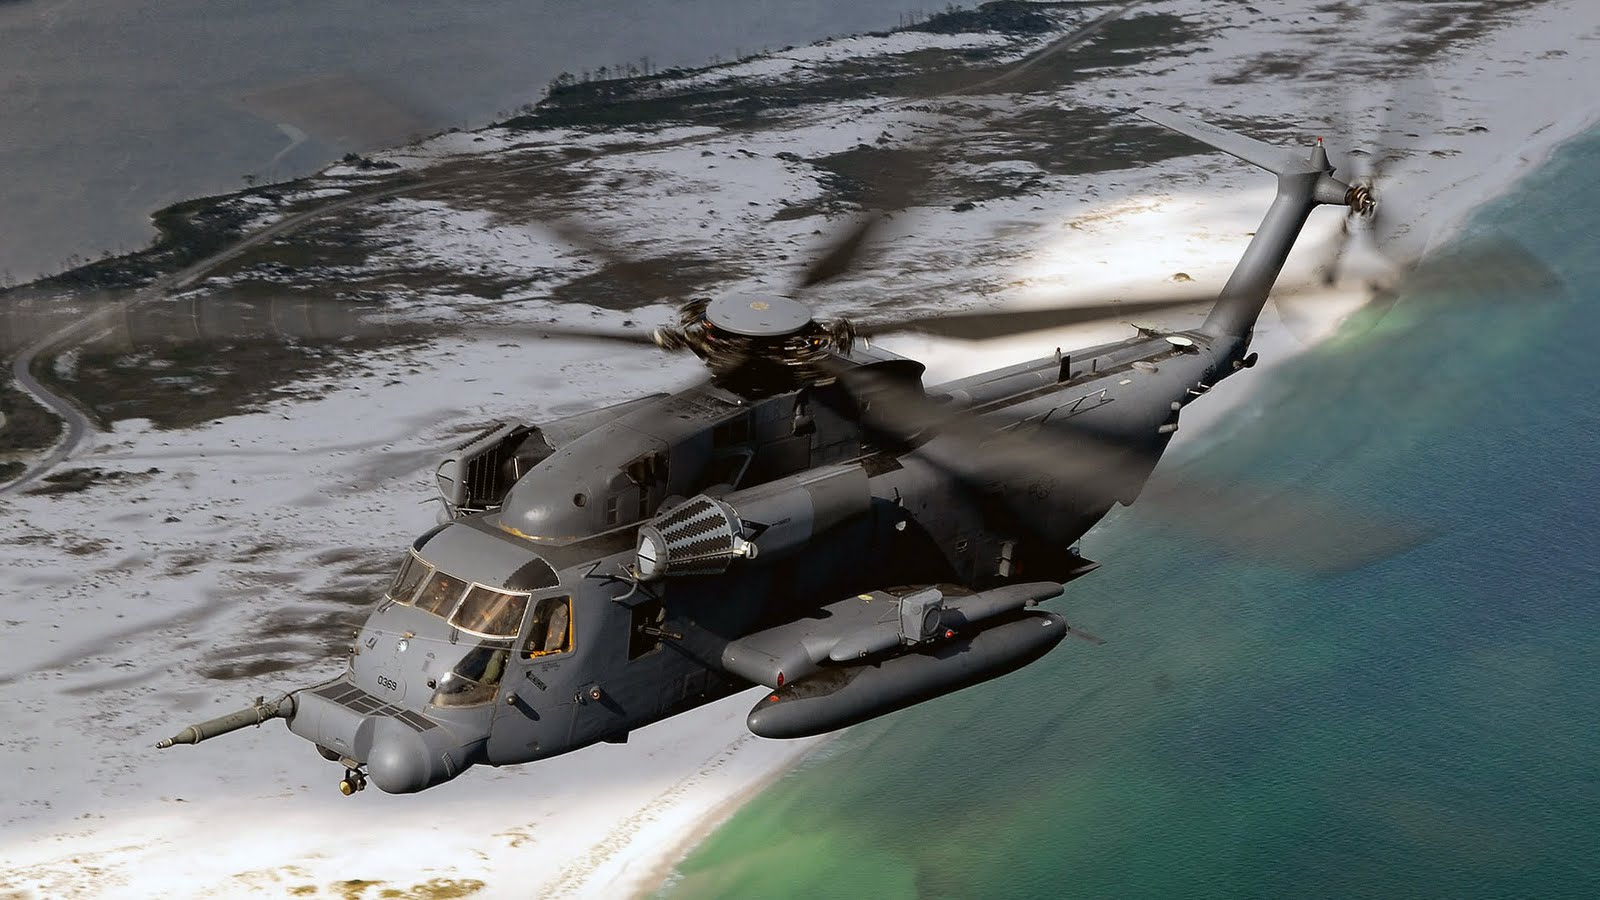 Mh Pave Low Helicopter Wallpaper